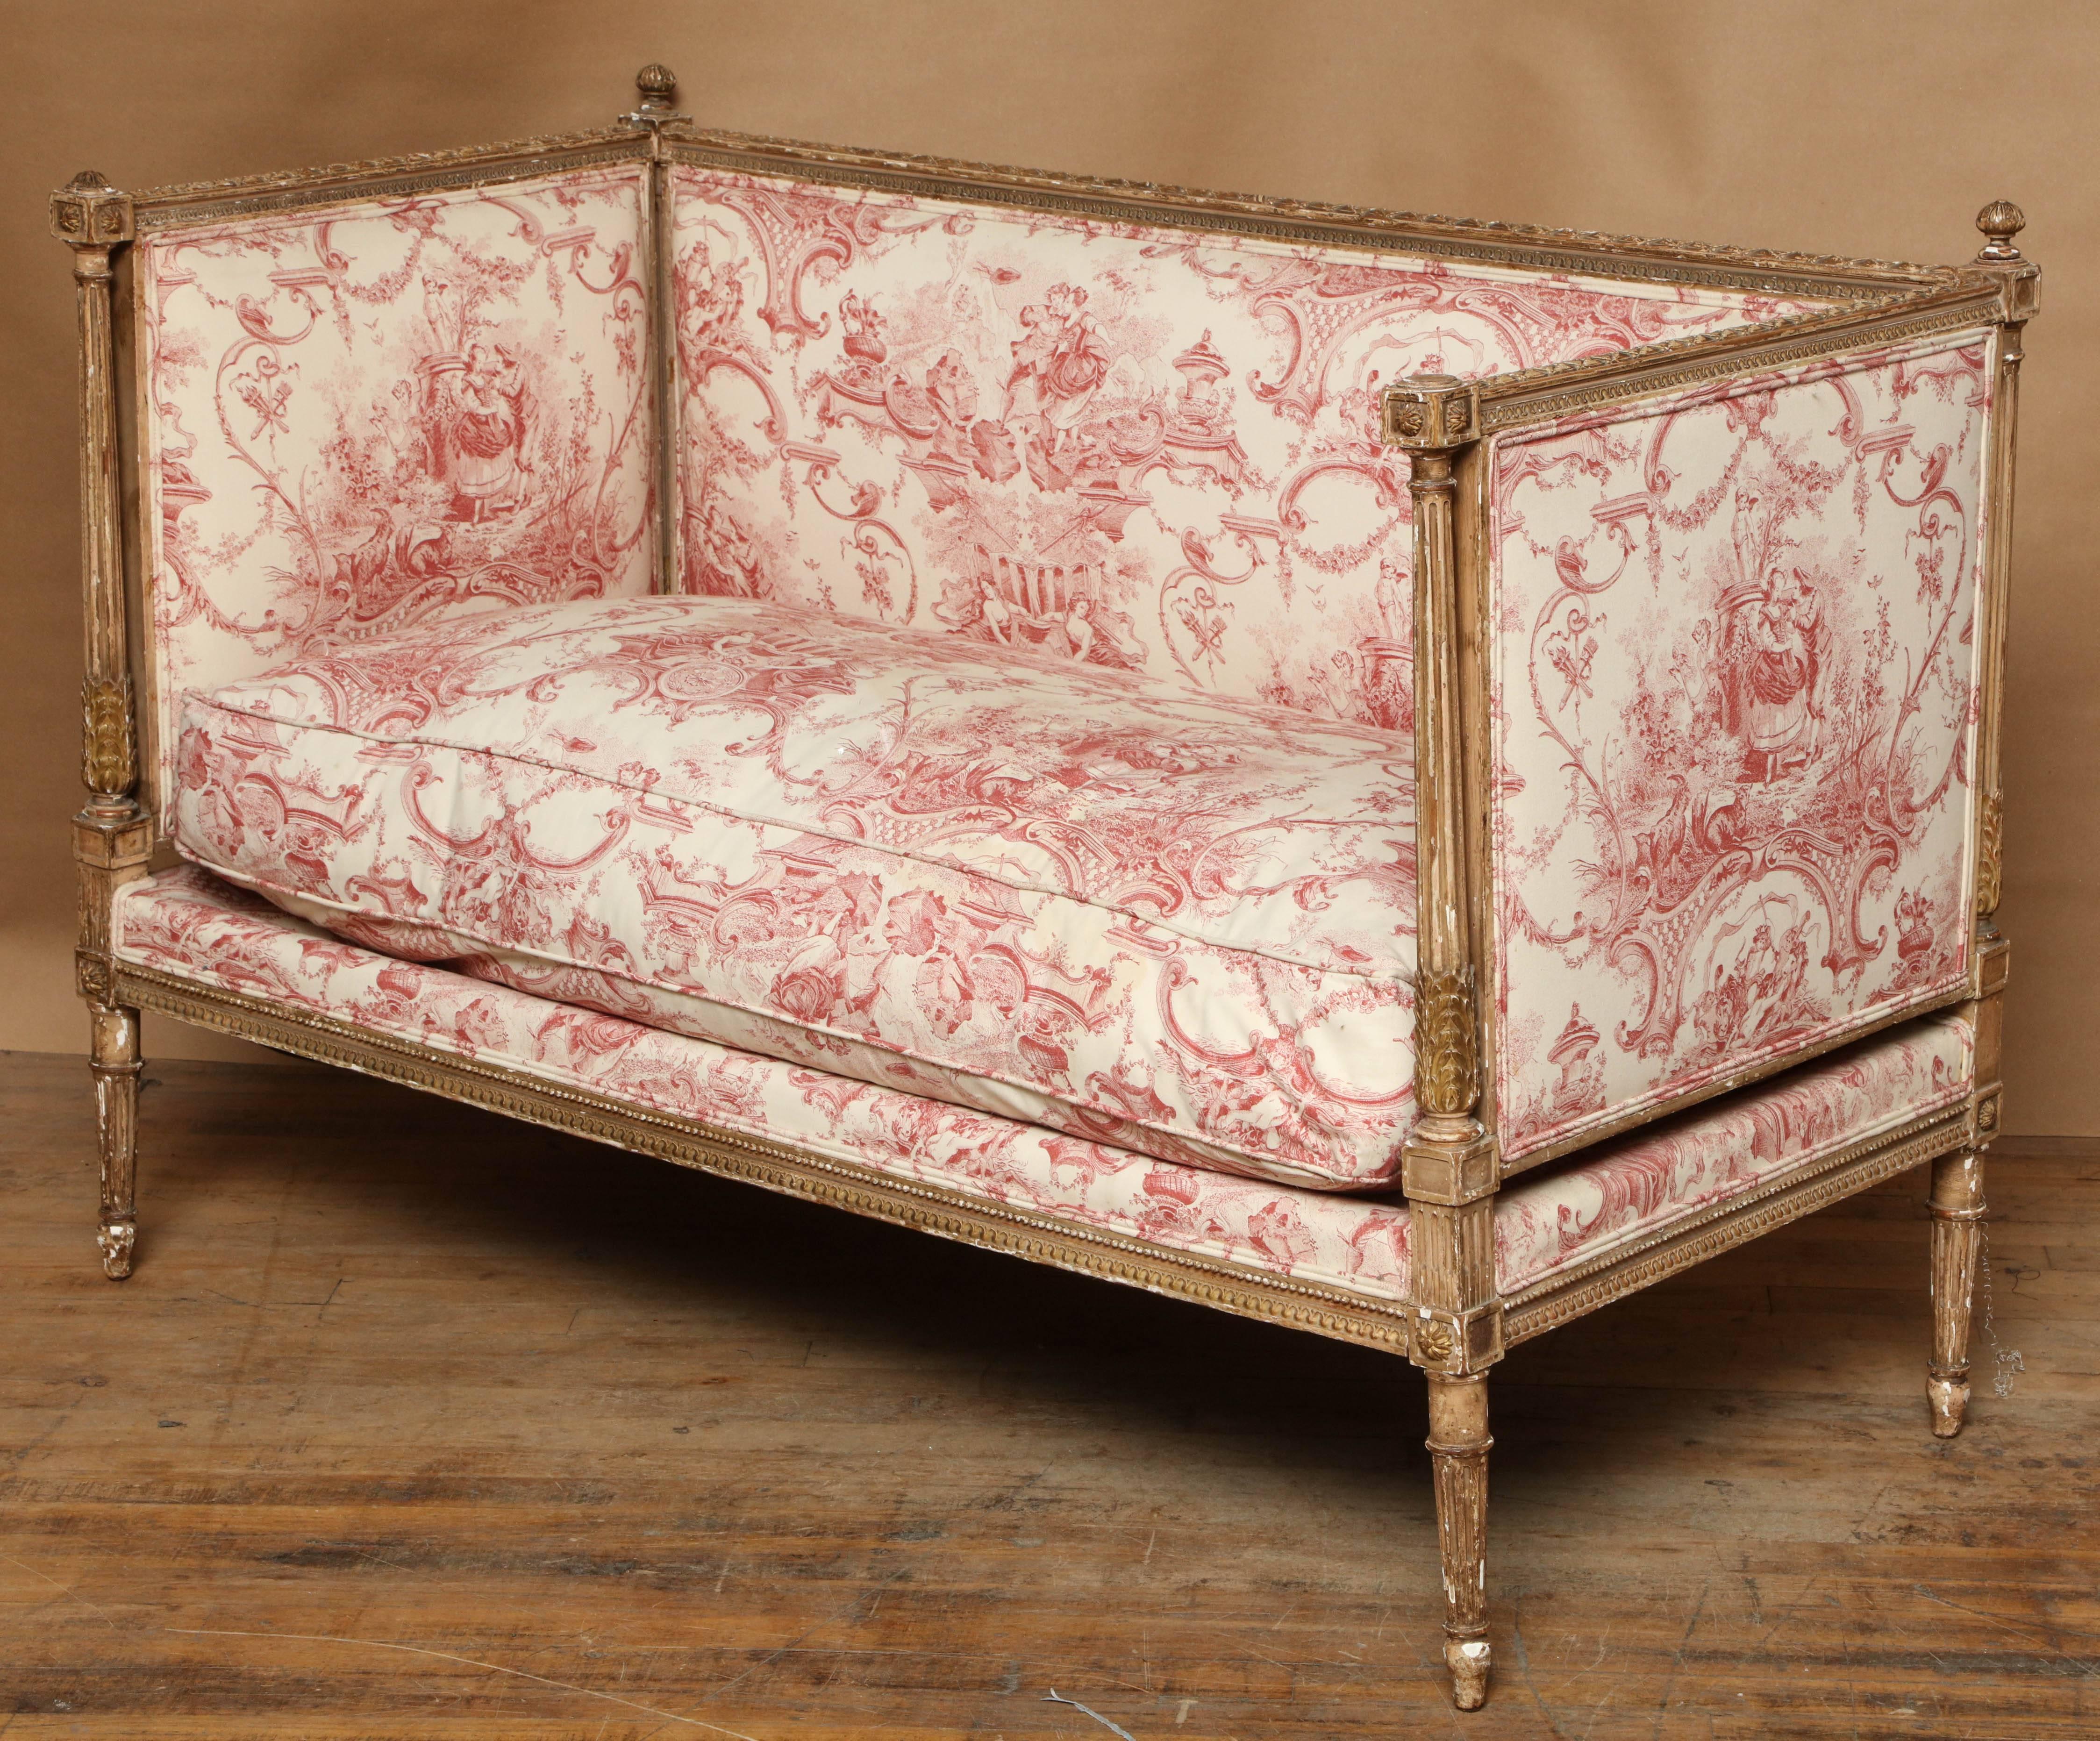 French Louis XVI daybed from late 18th century, with geometric forms and Minimalist neoclassical adornments imitating ancient Roman and Greek architecture.